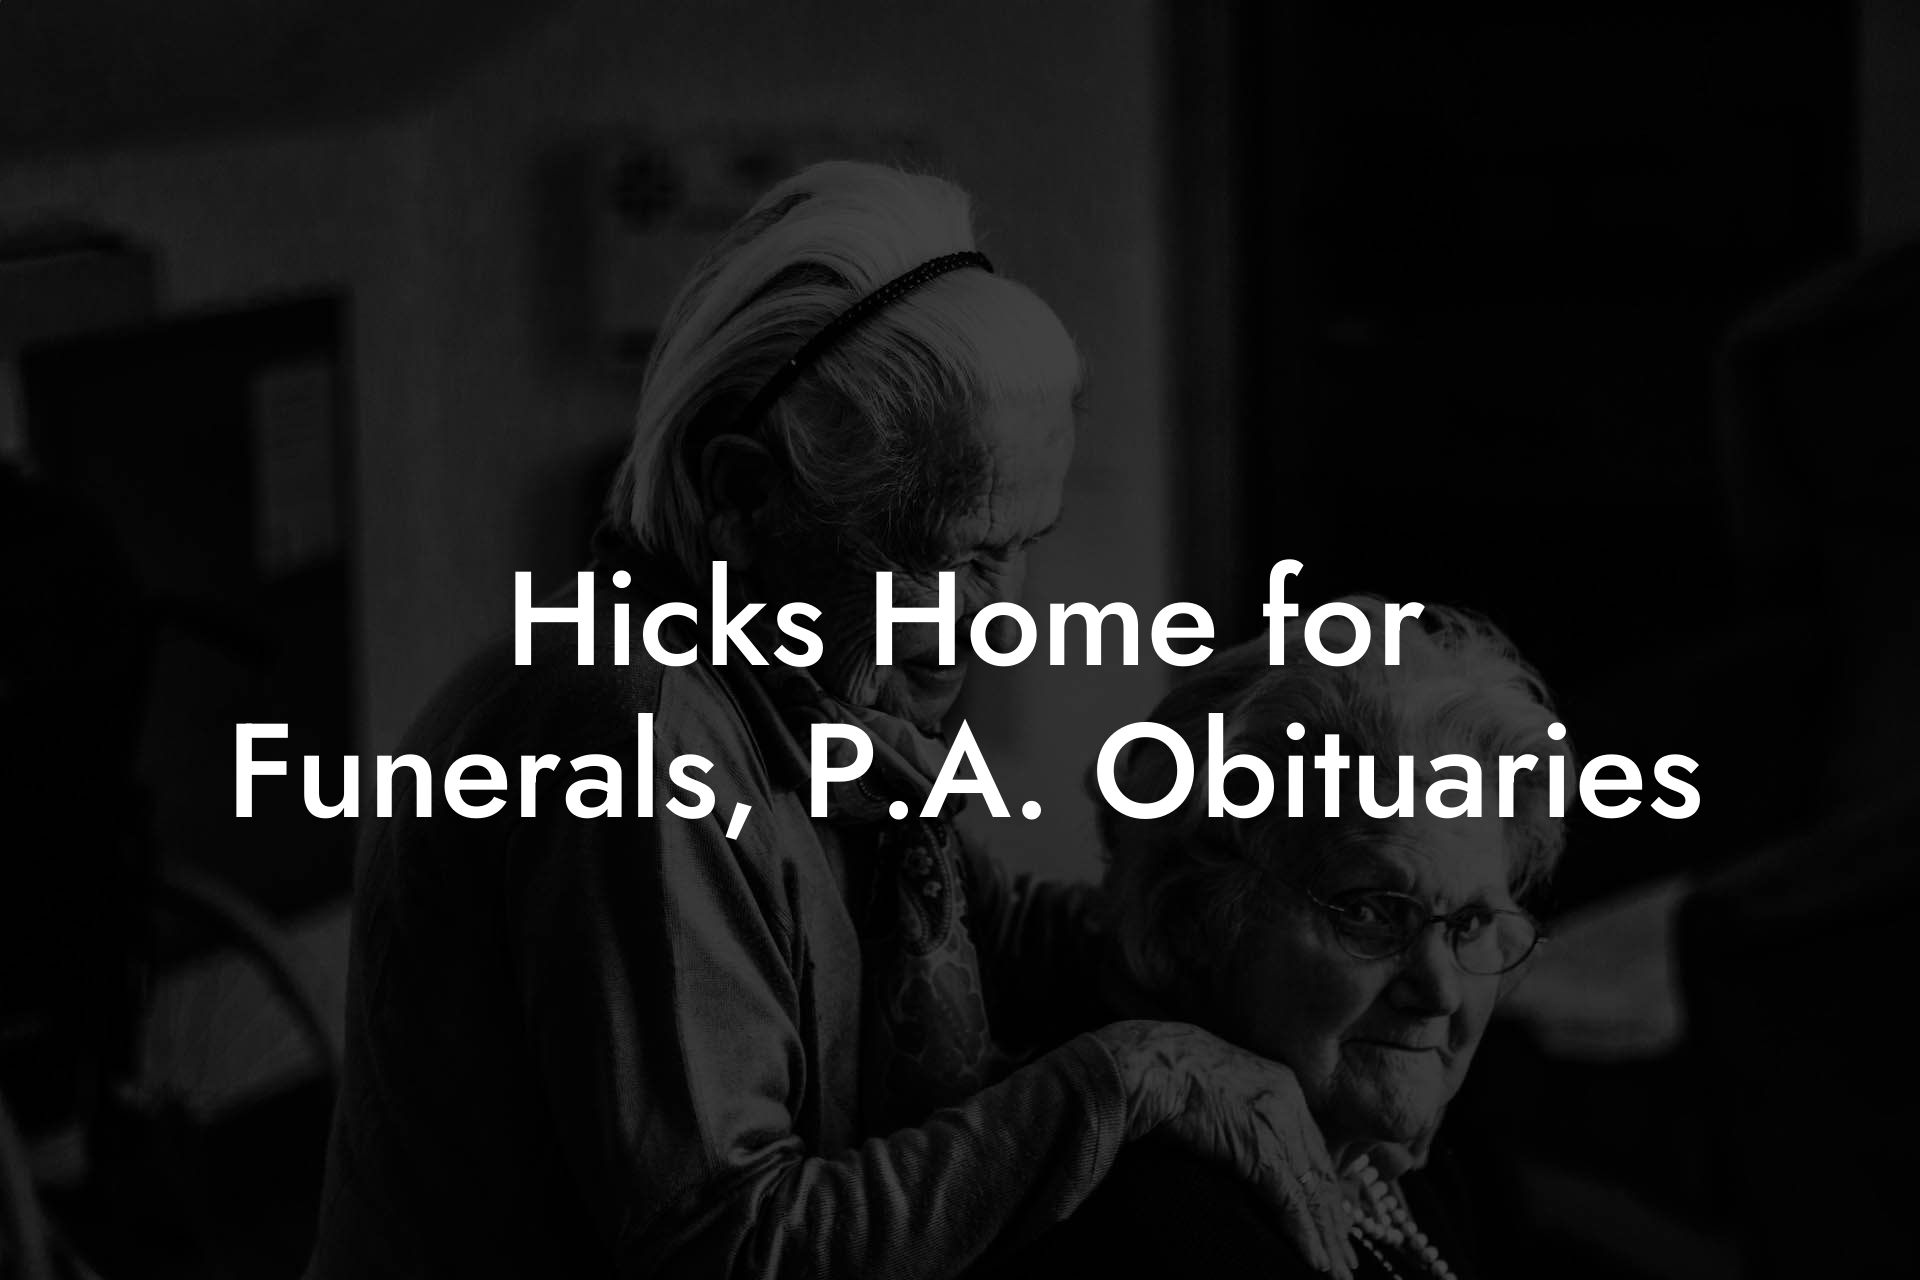 Hicks Home for Funerals, P.A. Obituaries